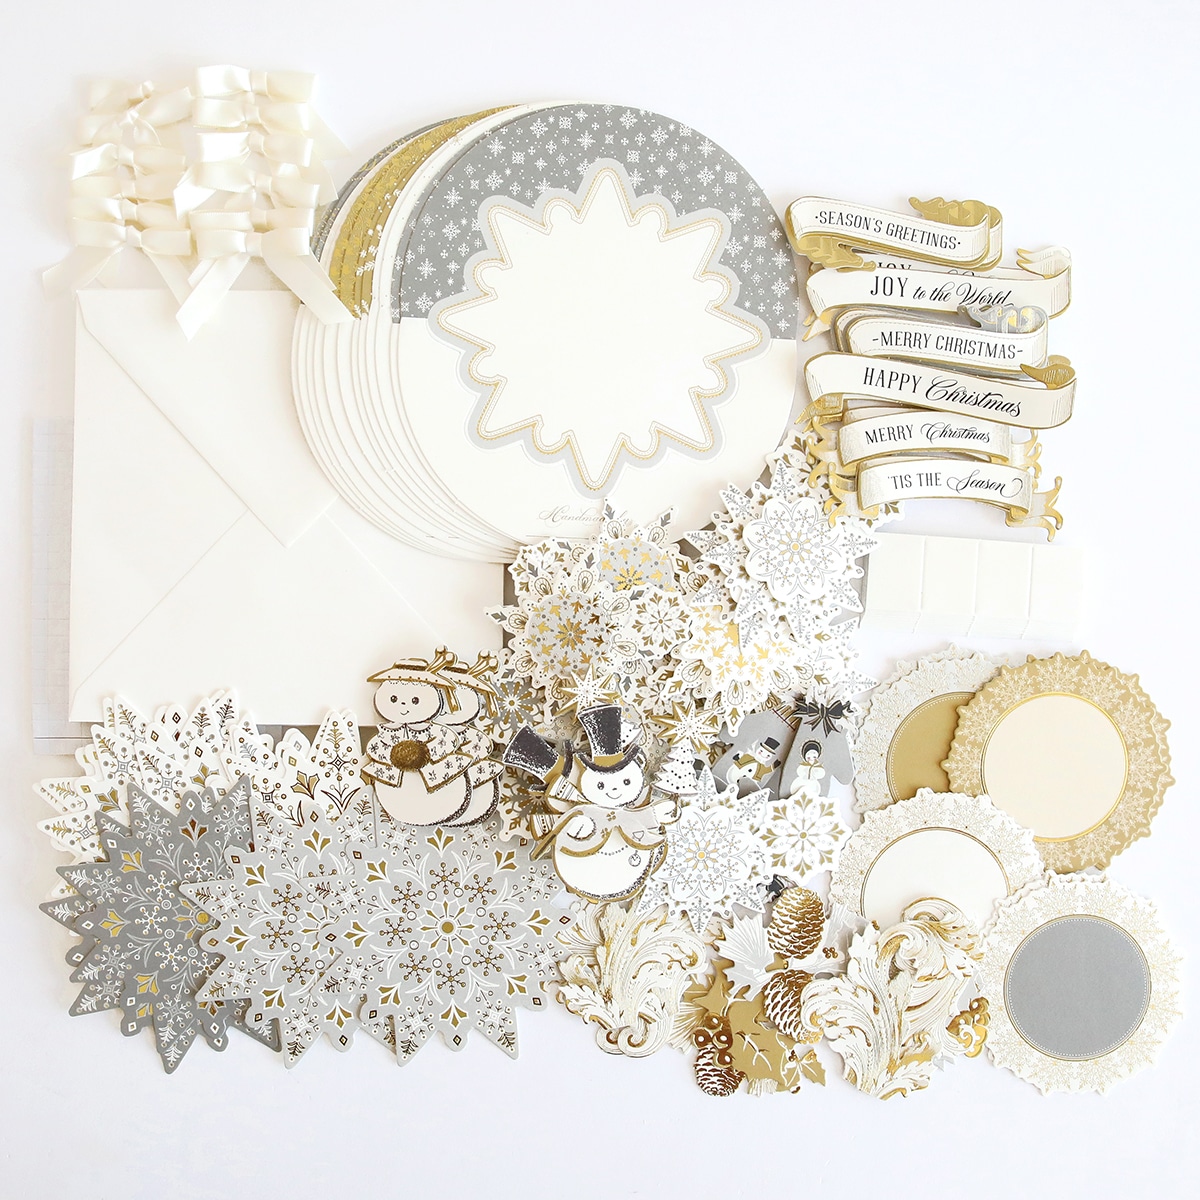 A collection of white and gold scrapbooking supplies.